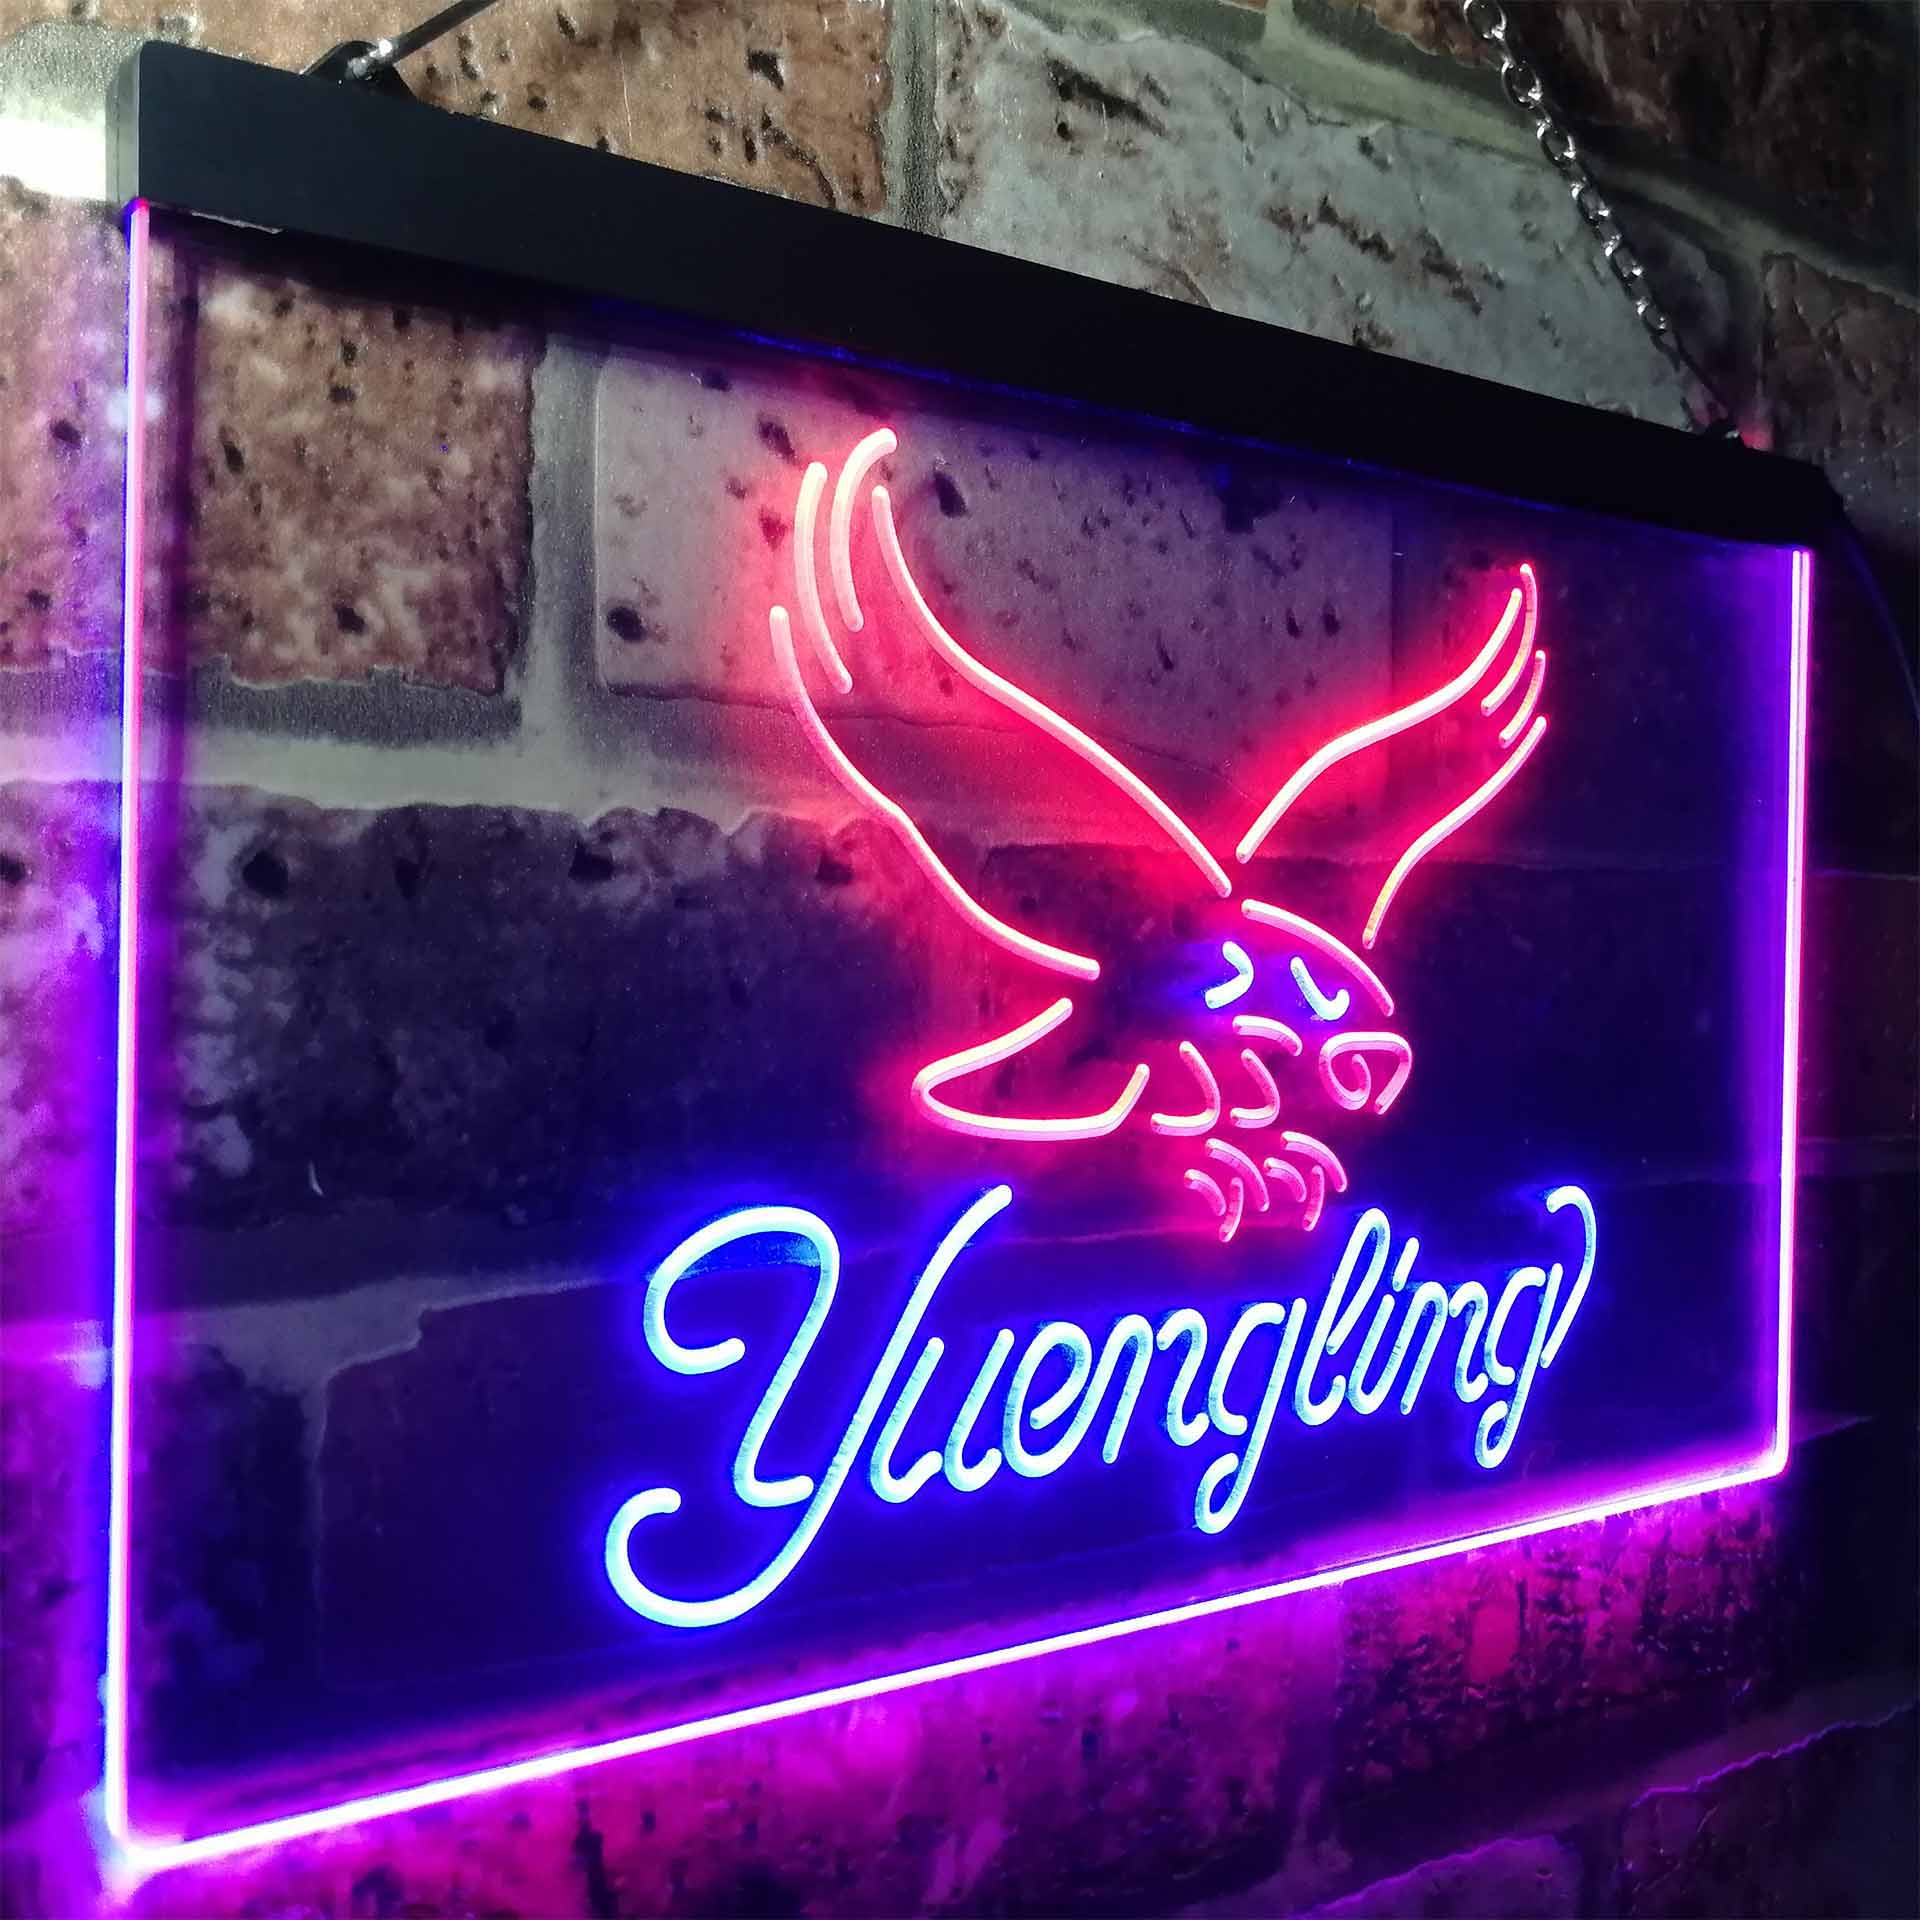 Yuengling Beer Bar Neon LED Sign